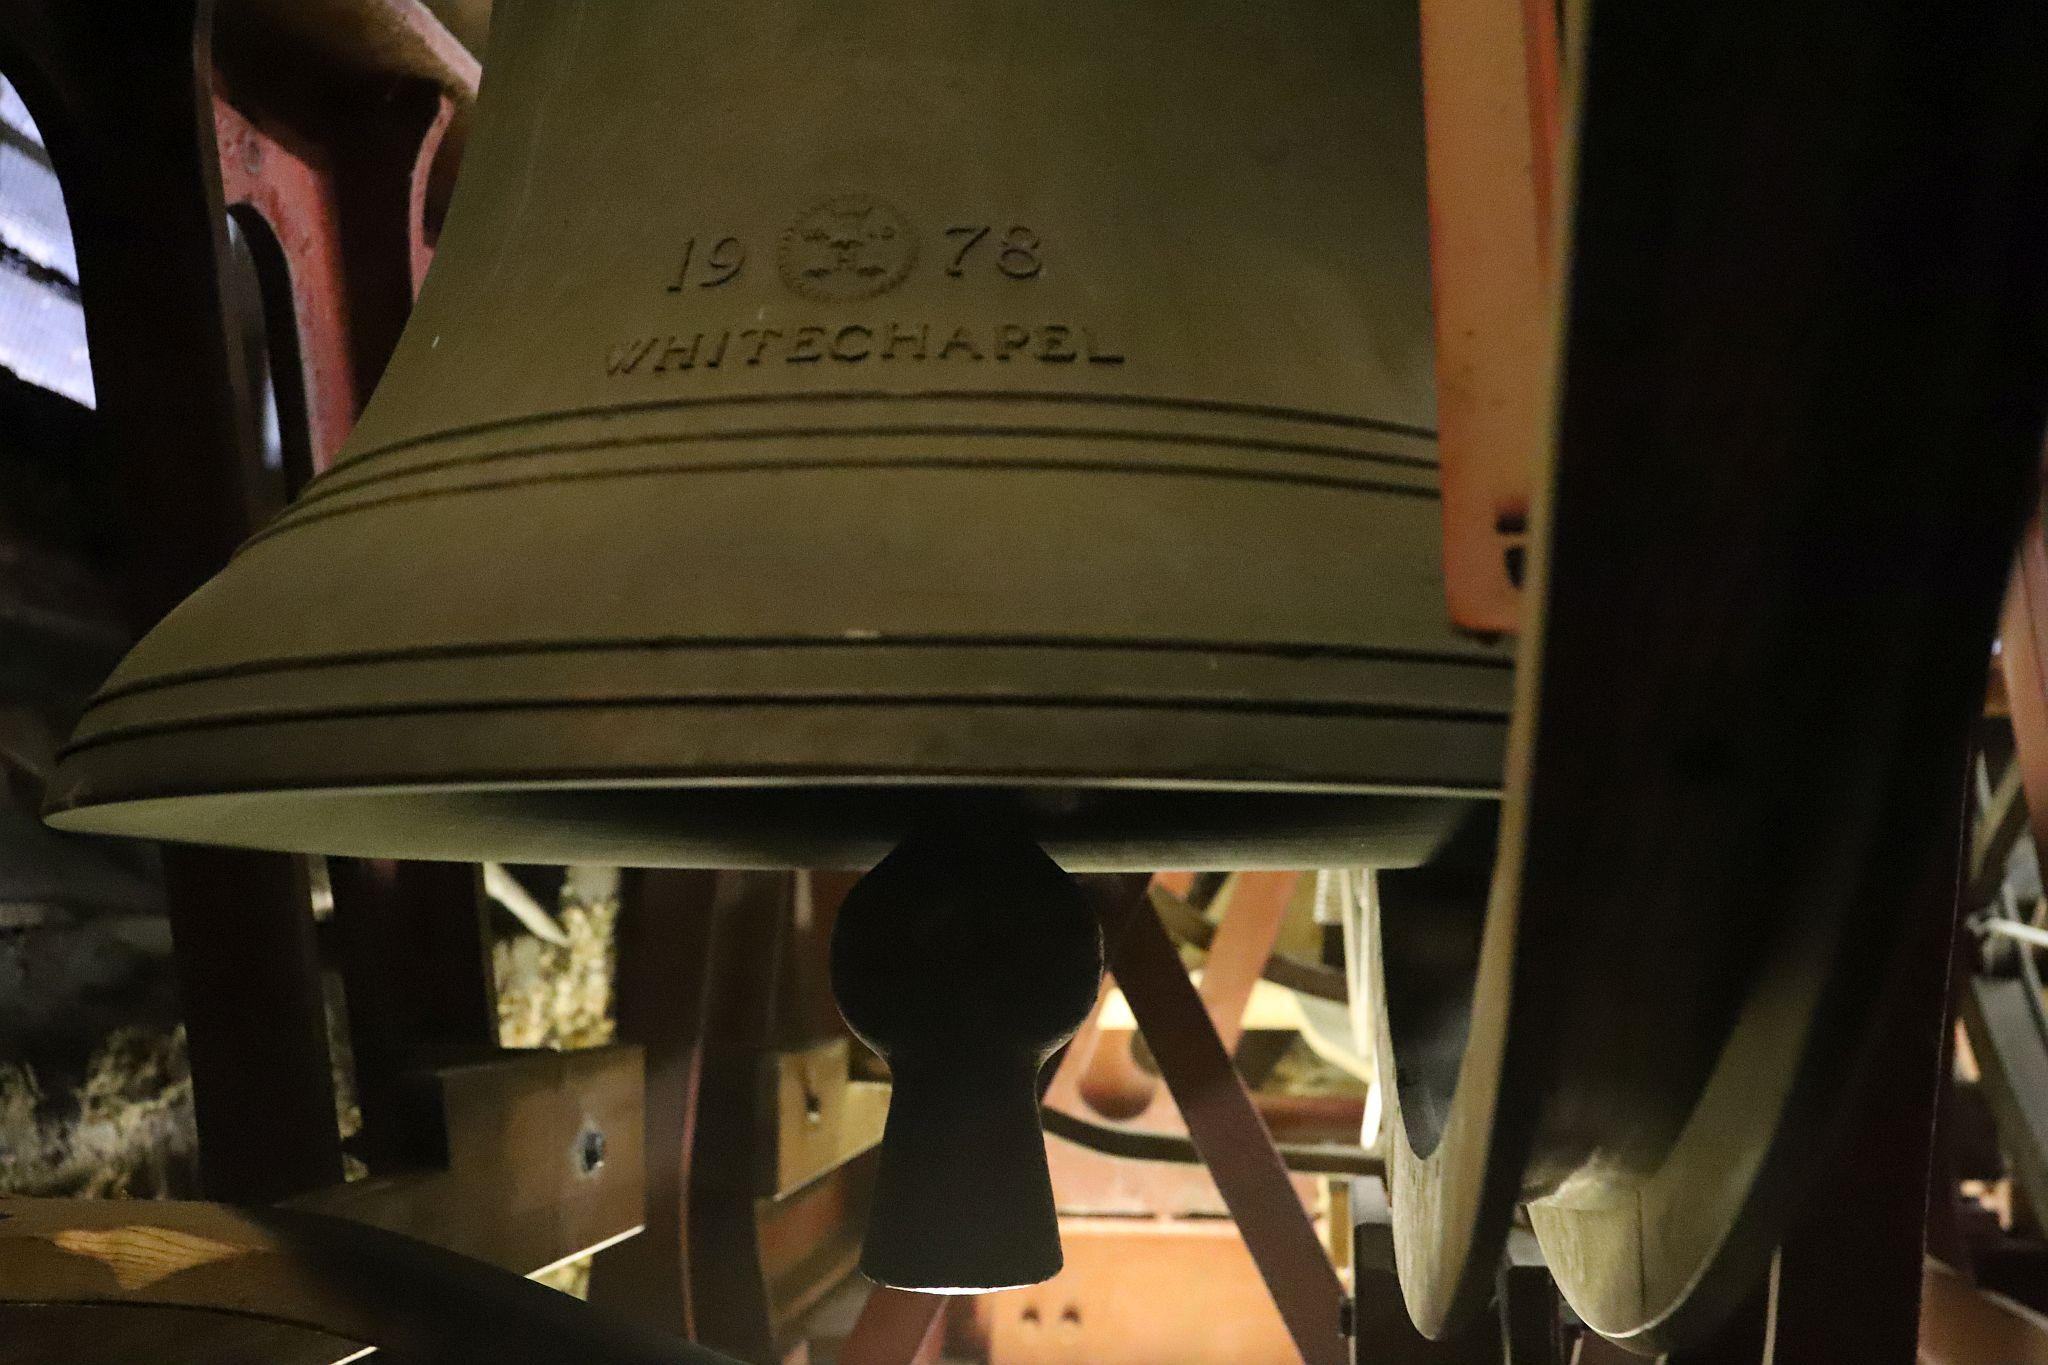 The church bells in the belfry. St Mary’s Church, Harrow-on-the-Hill, London. 29-Apr-2023.